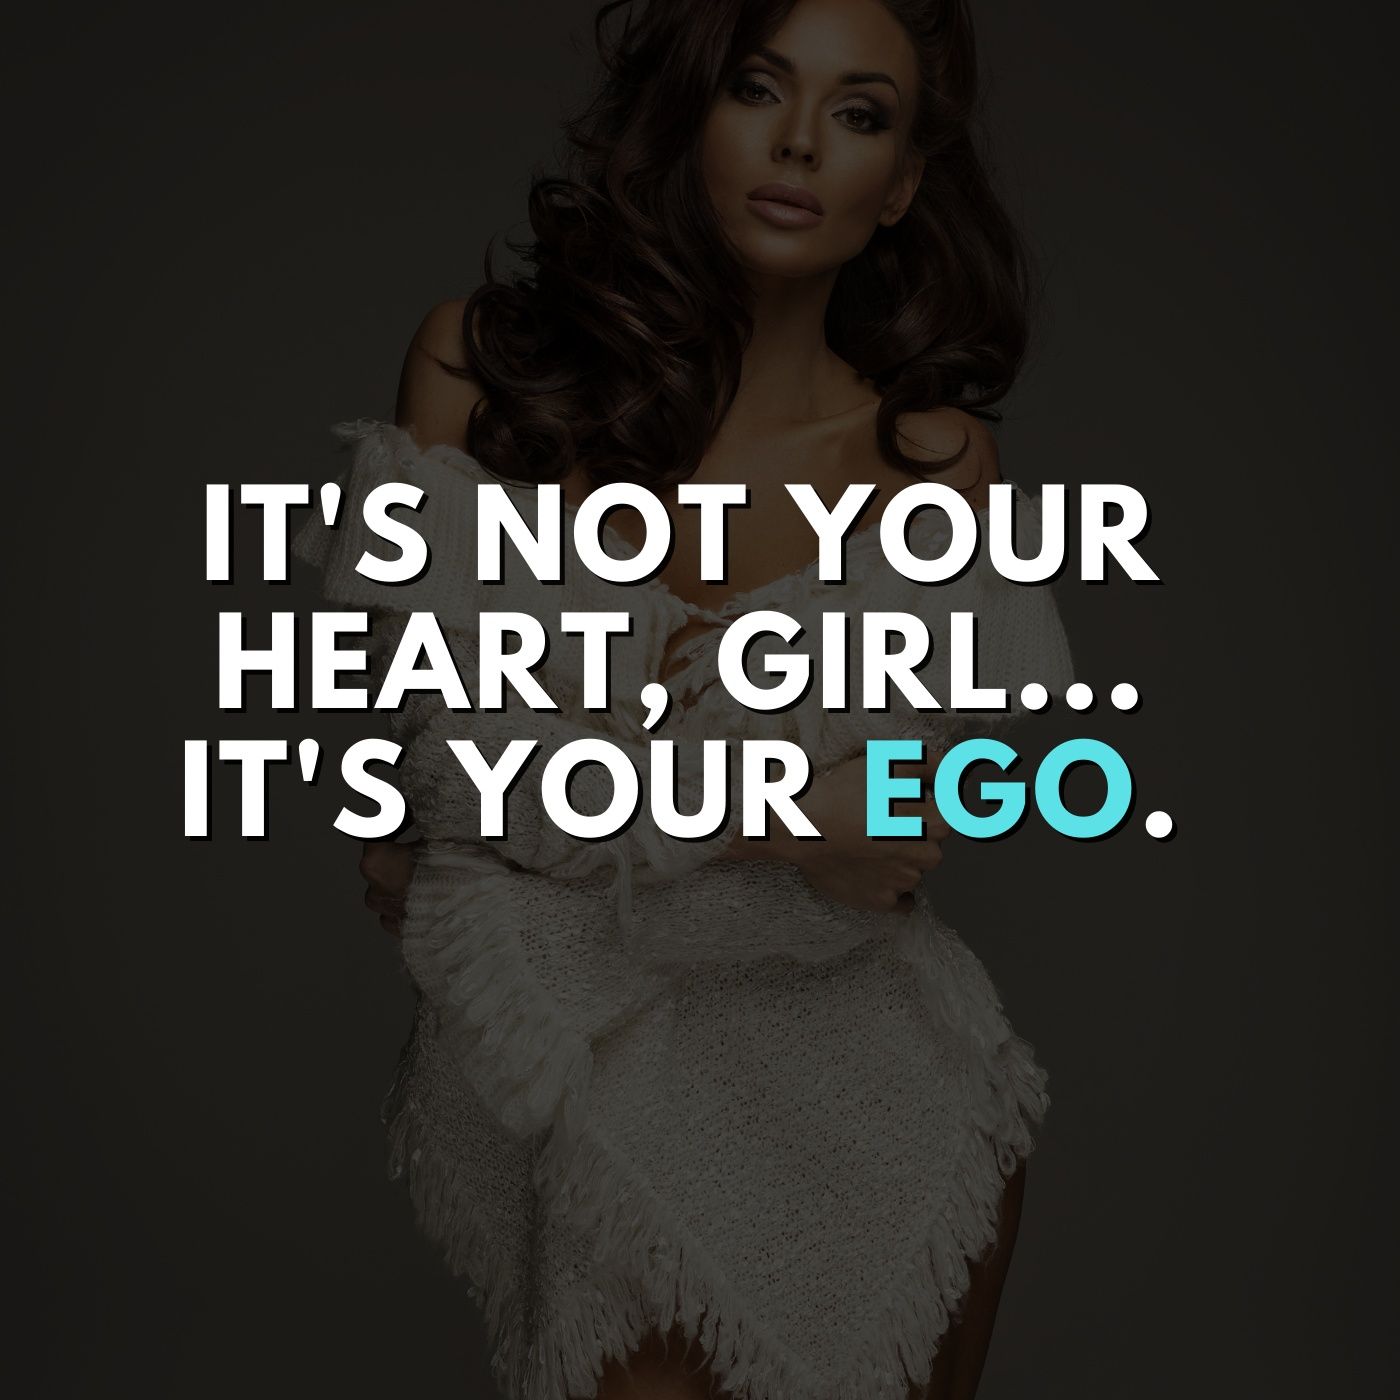 It's not your heart, girl... it's your ego.